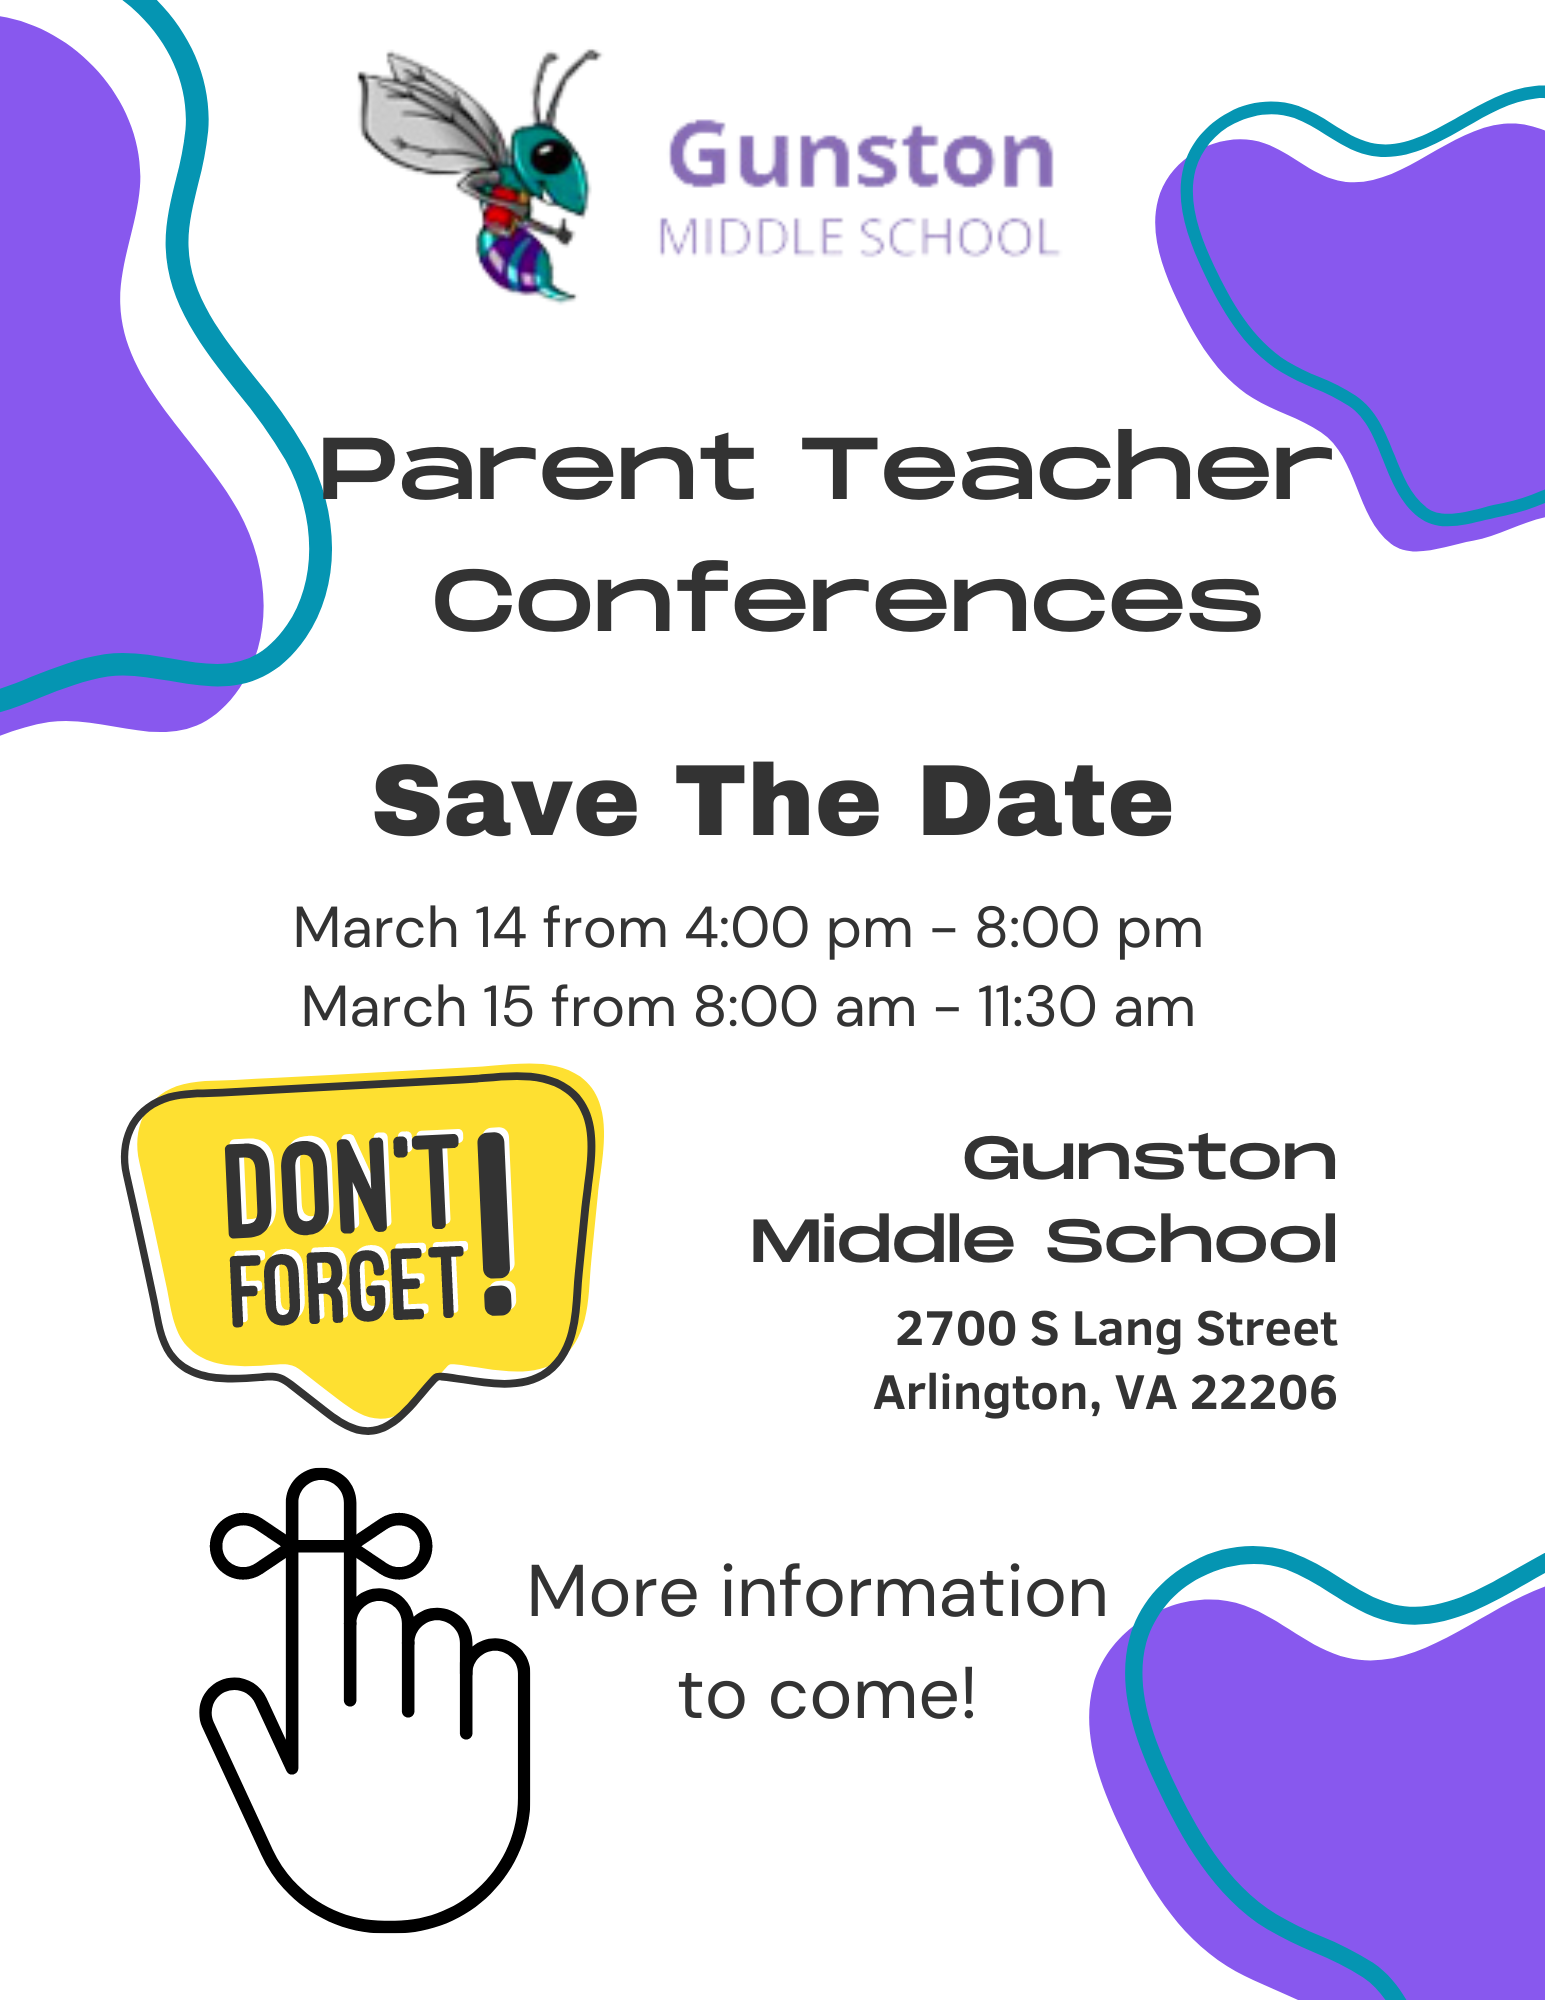 Parent Teacher Conference Save the Date